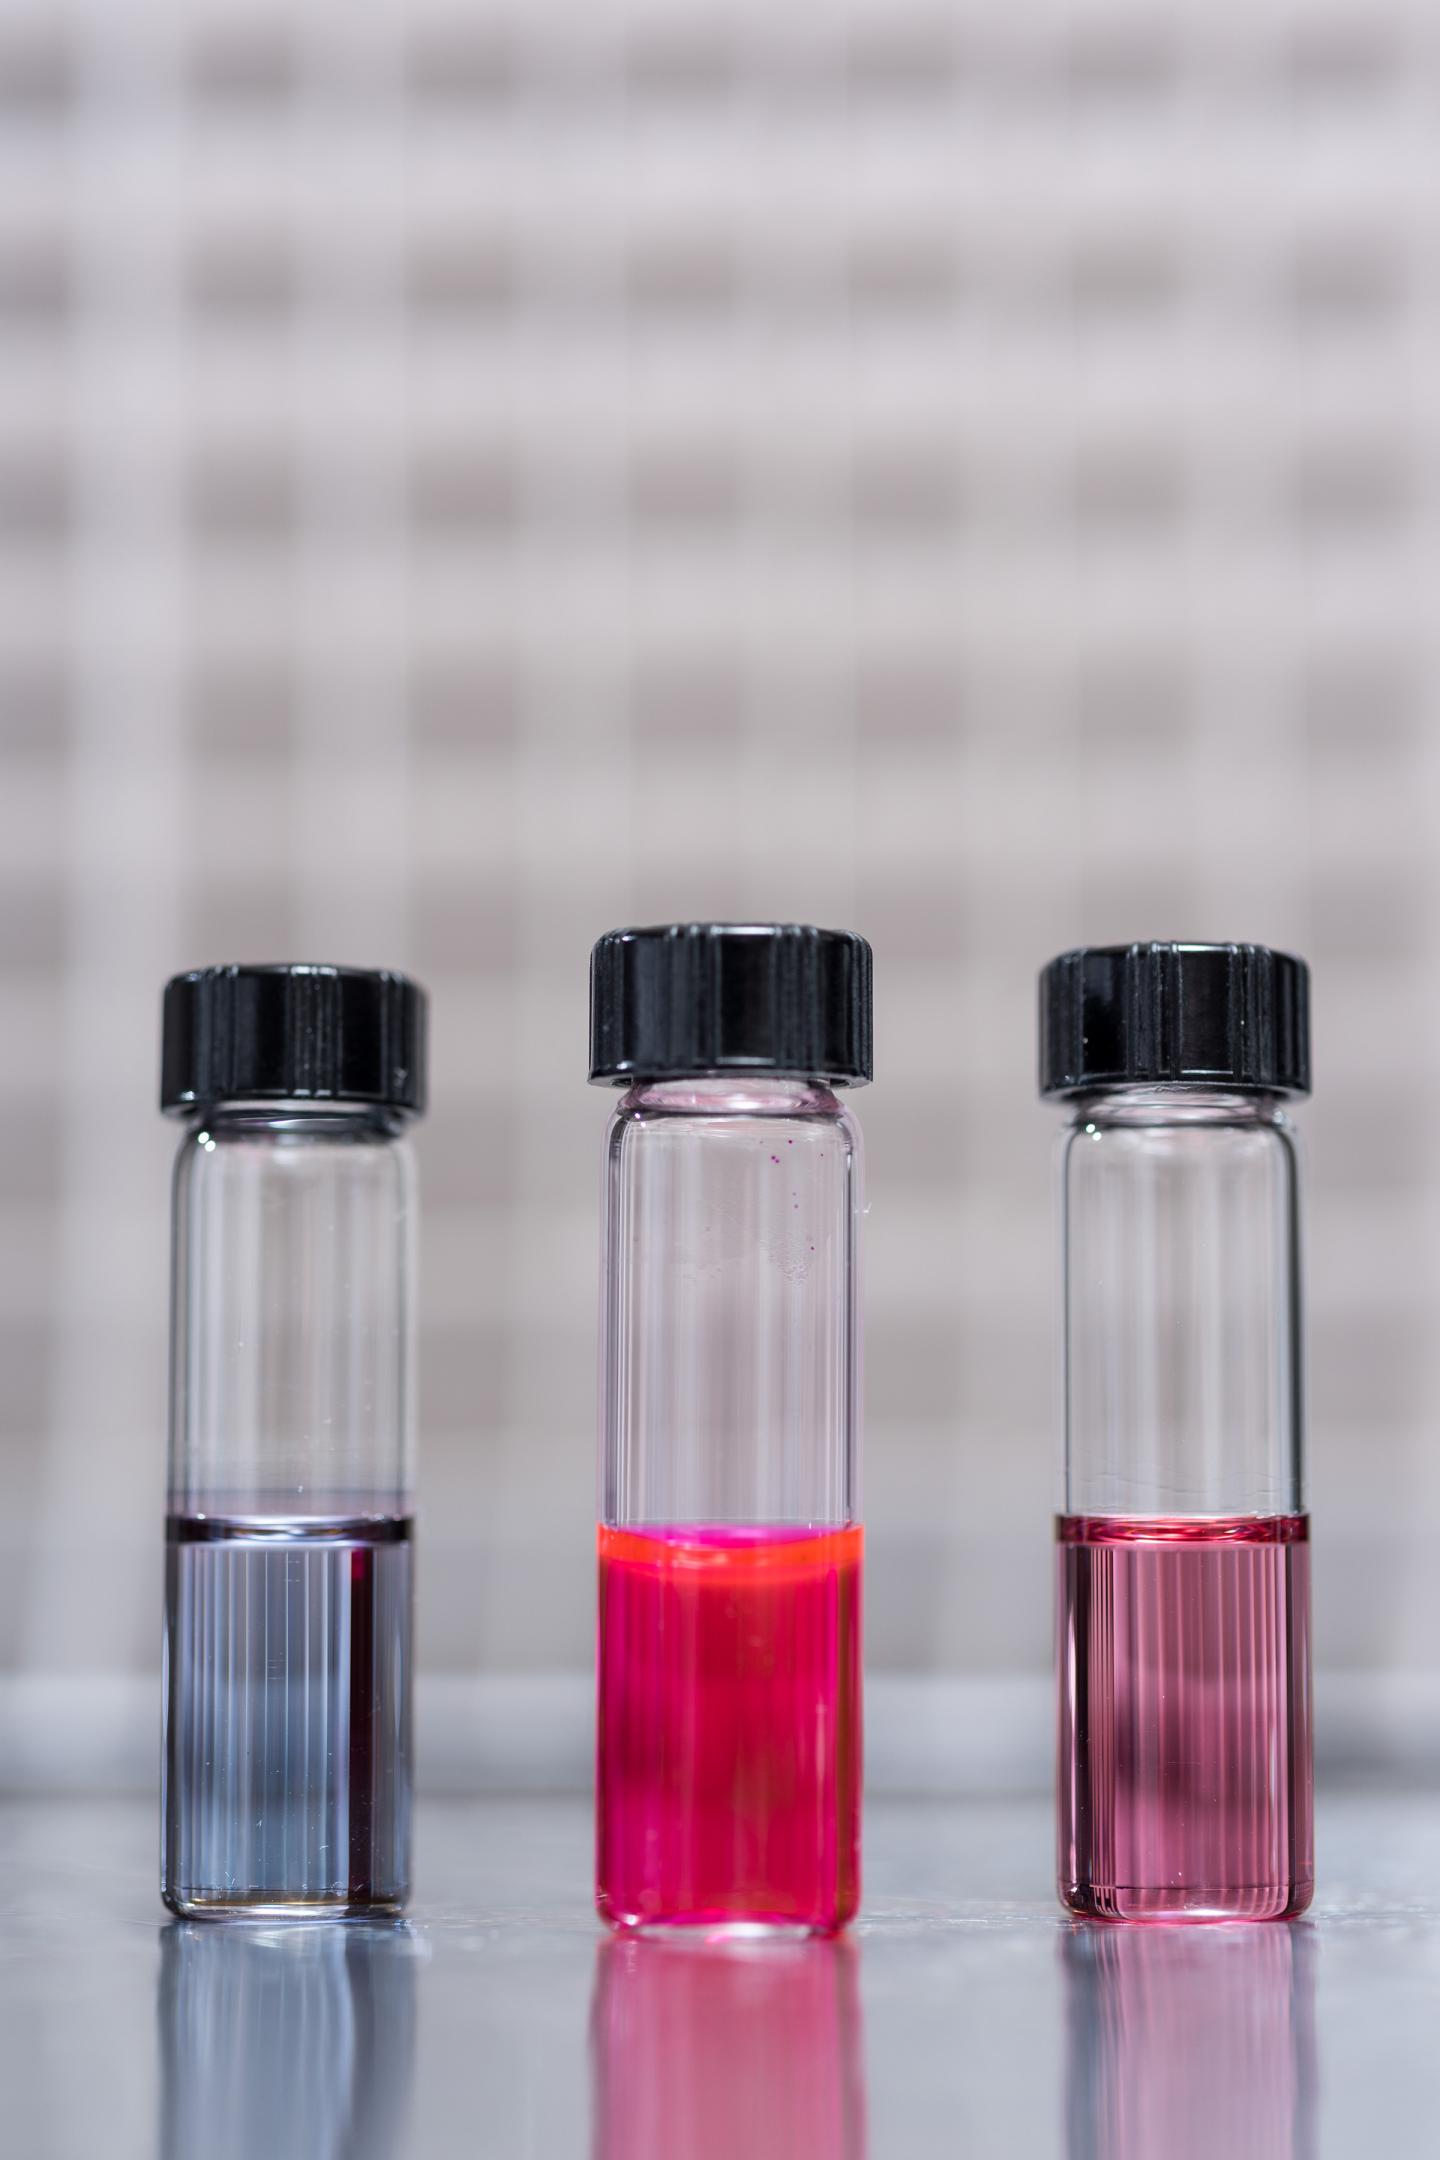 Vials Containing Hairy Nanoparticles